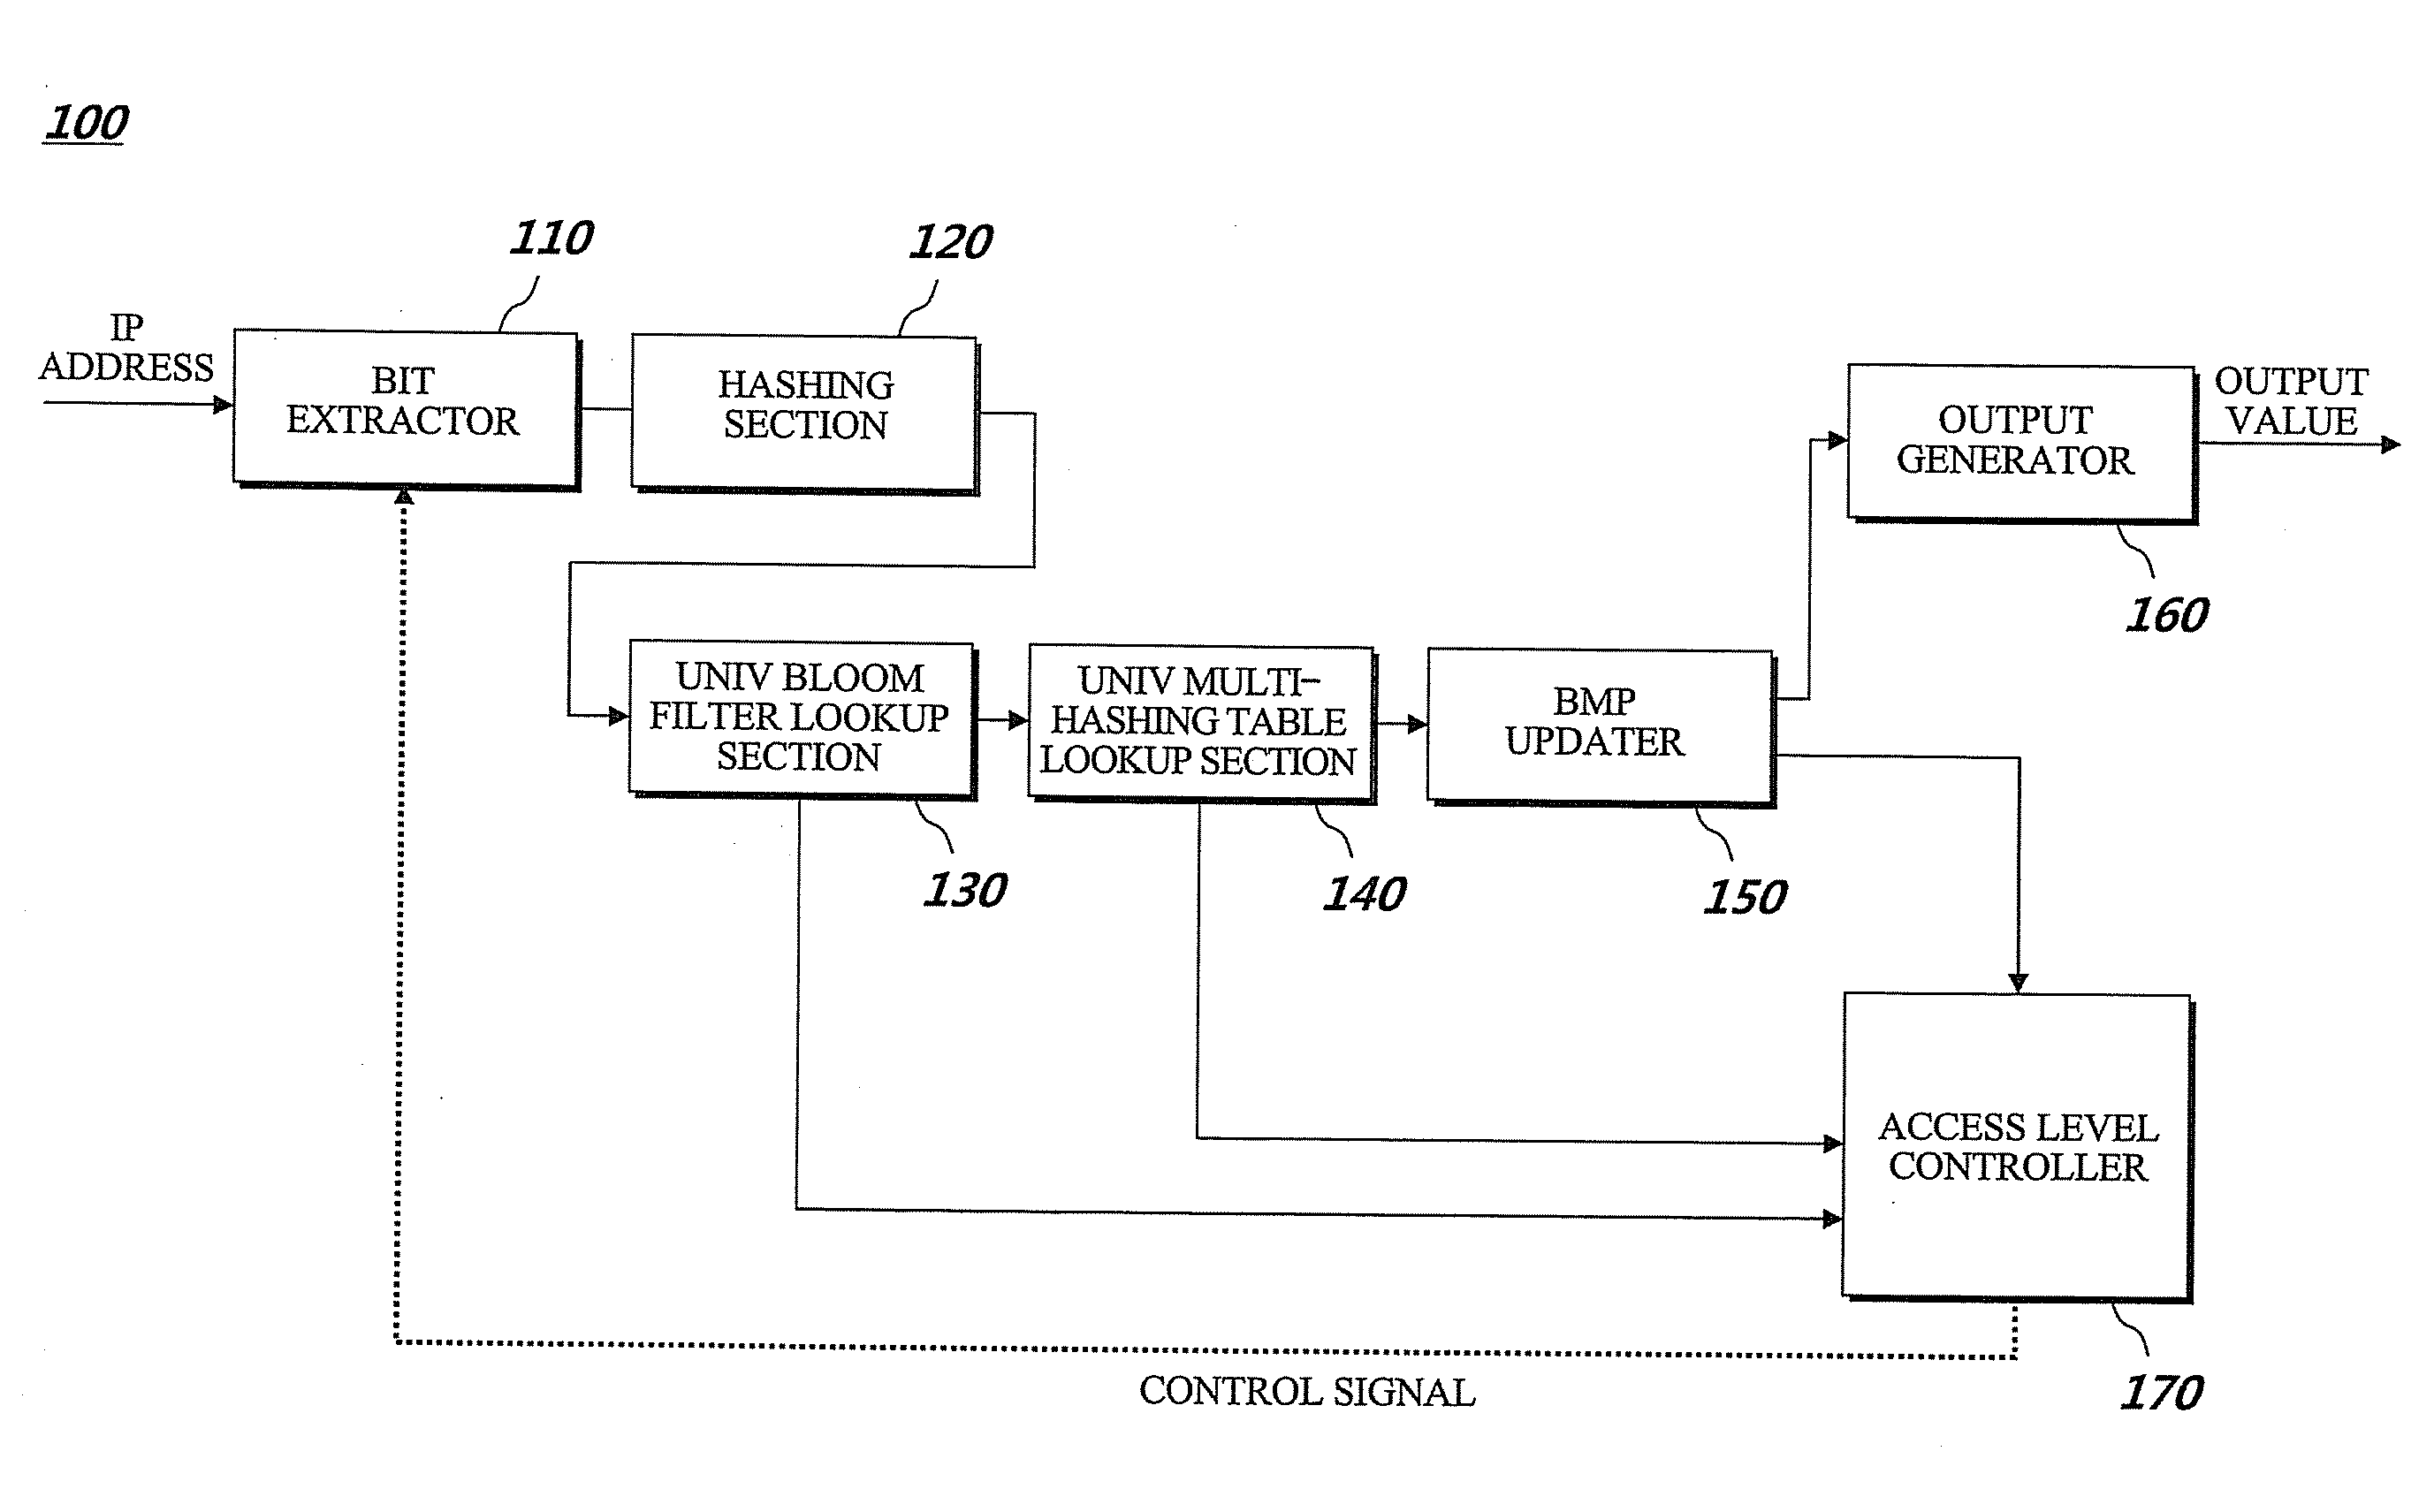 Method and apparatus for searching IP address